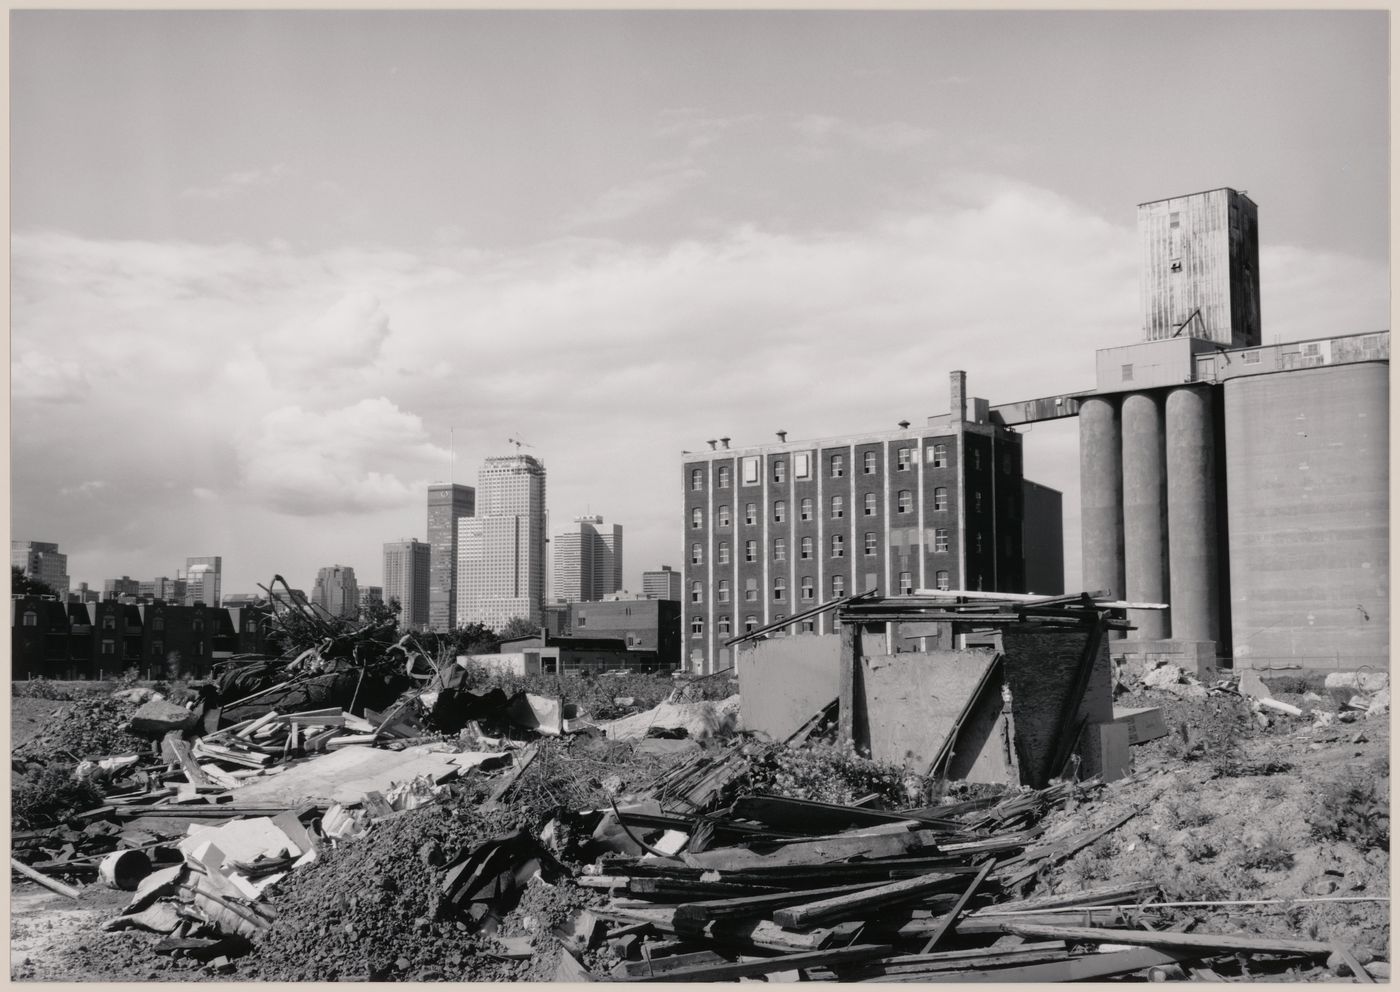 Field Work in Montreal: View of a wooden shack-like structure, a dump and a grain elevator showing office towers in the background, Montréal, Québec